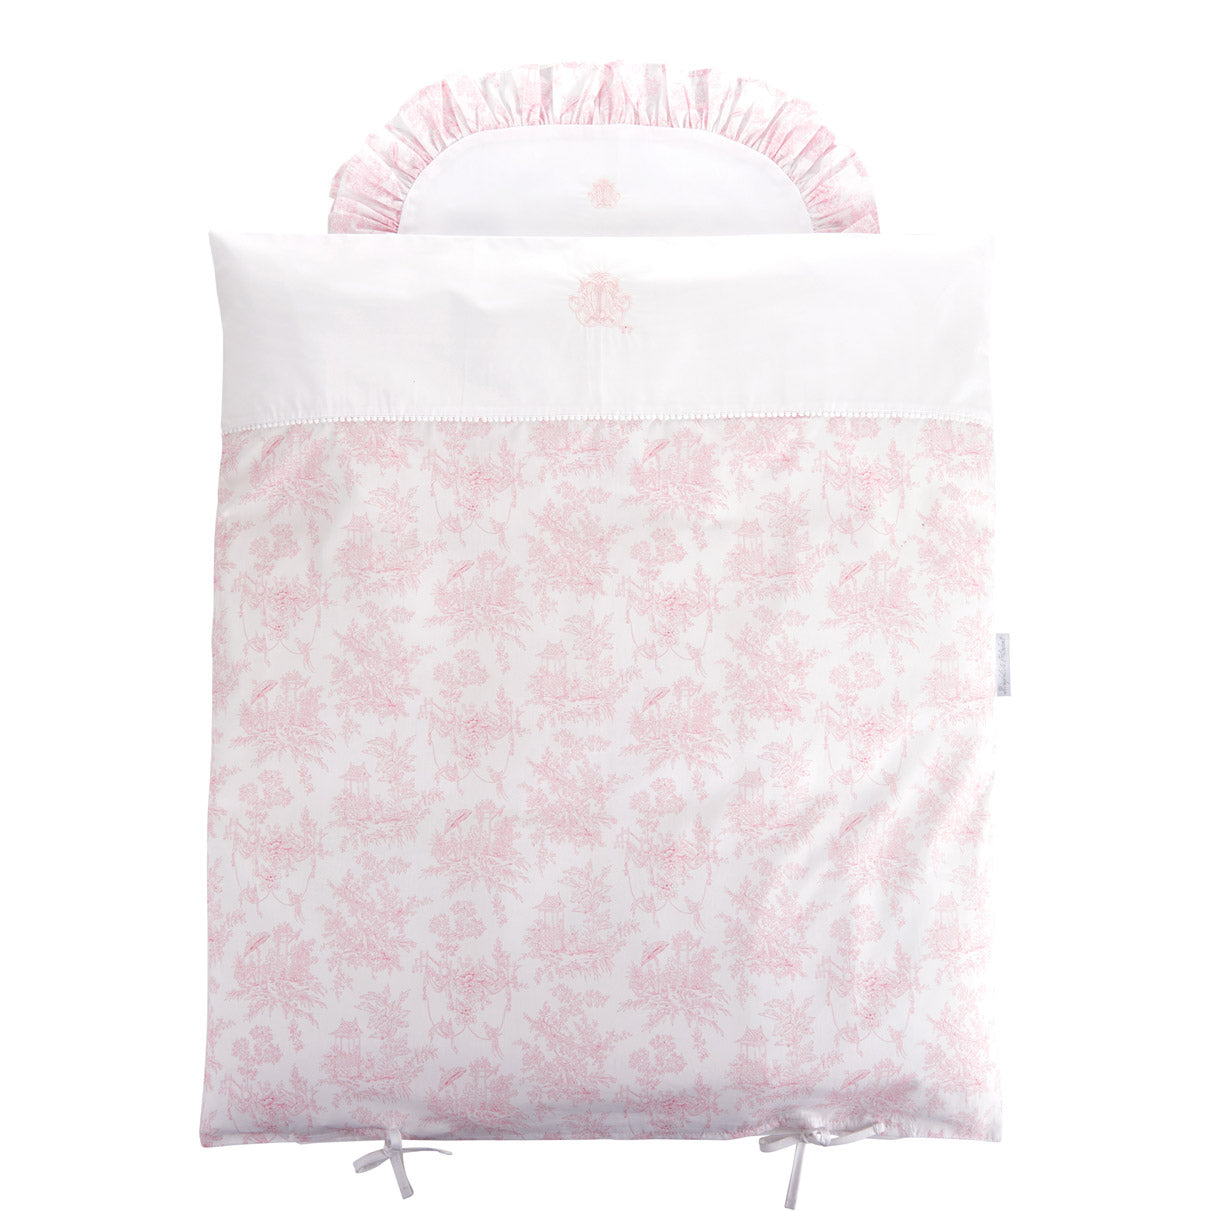 Theophile & Patachou Cradle Duvet Cover and Pillowcase - Sweet Pink